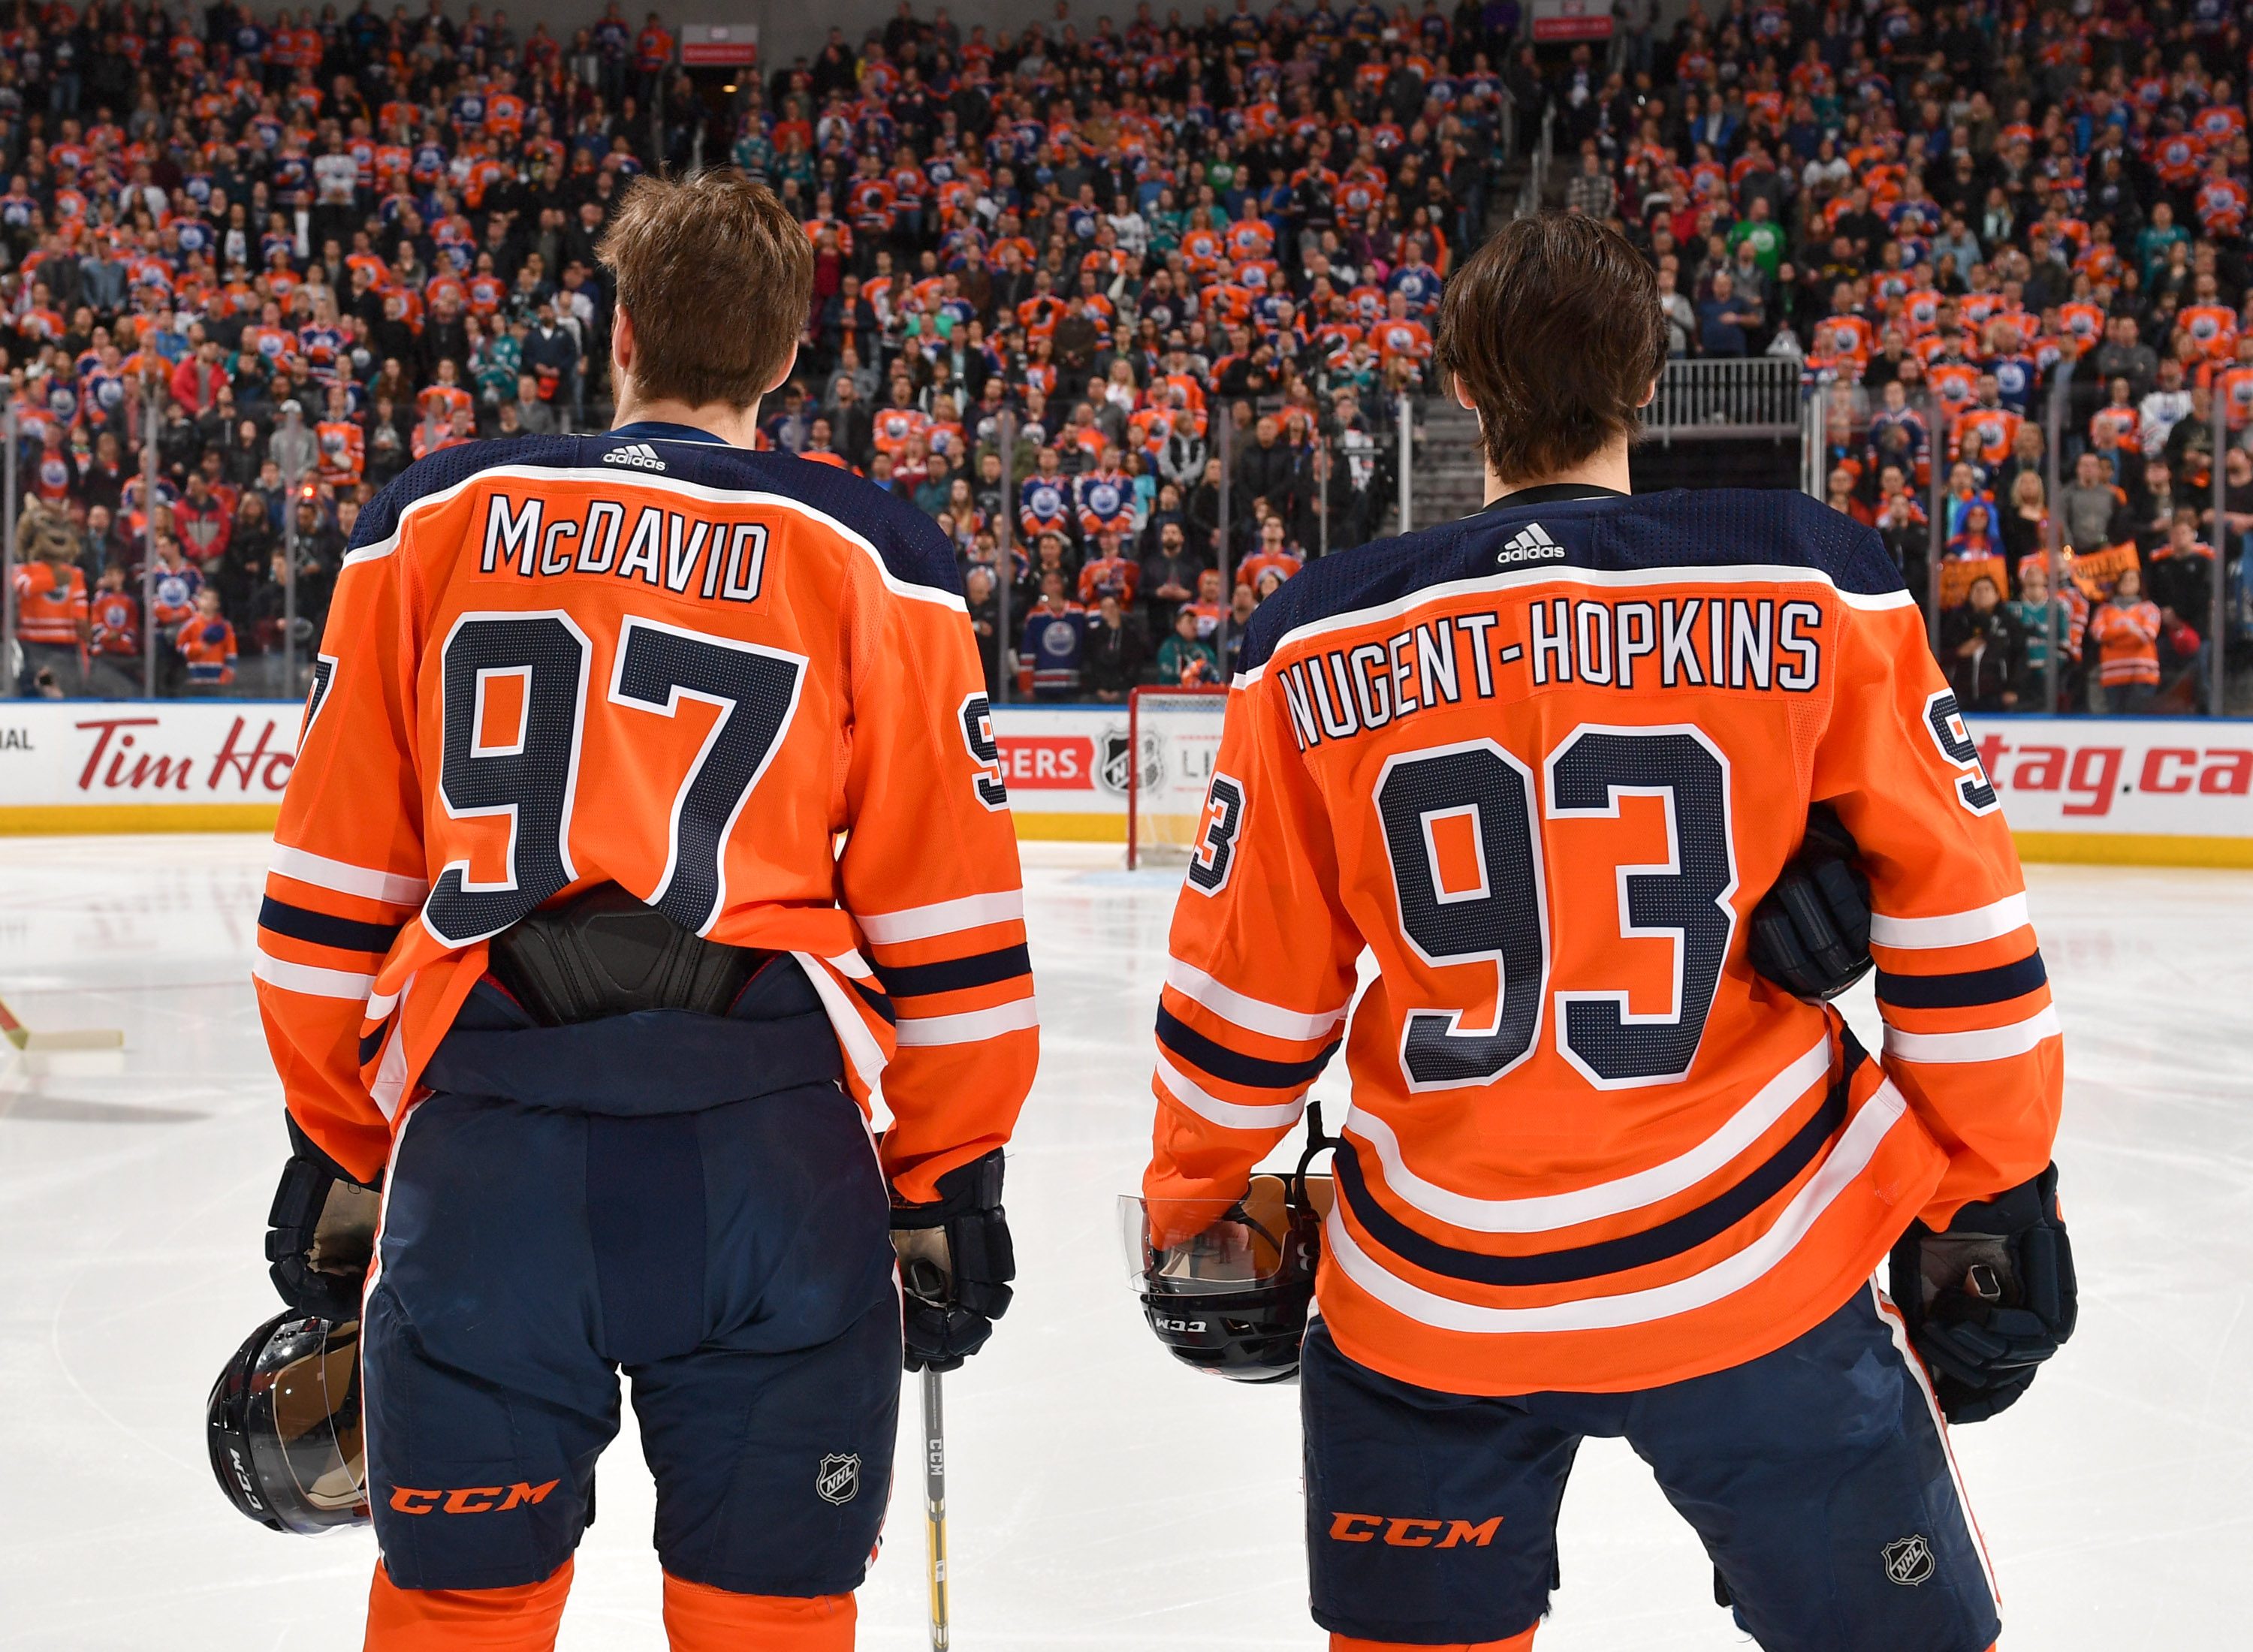 Edmonton Oilers' Ryan Nugent-Hopkins at home on Connor McDavid's wing